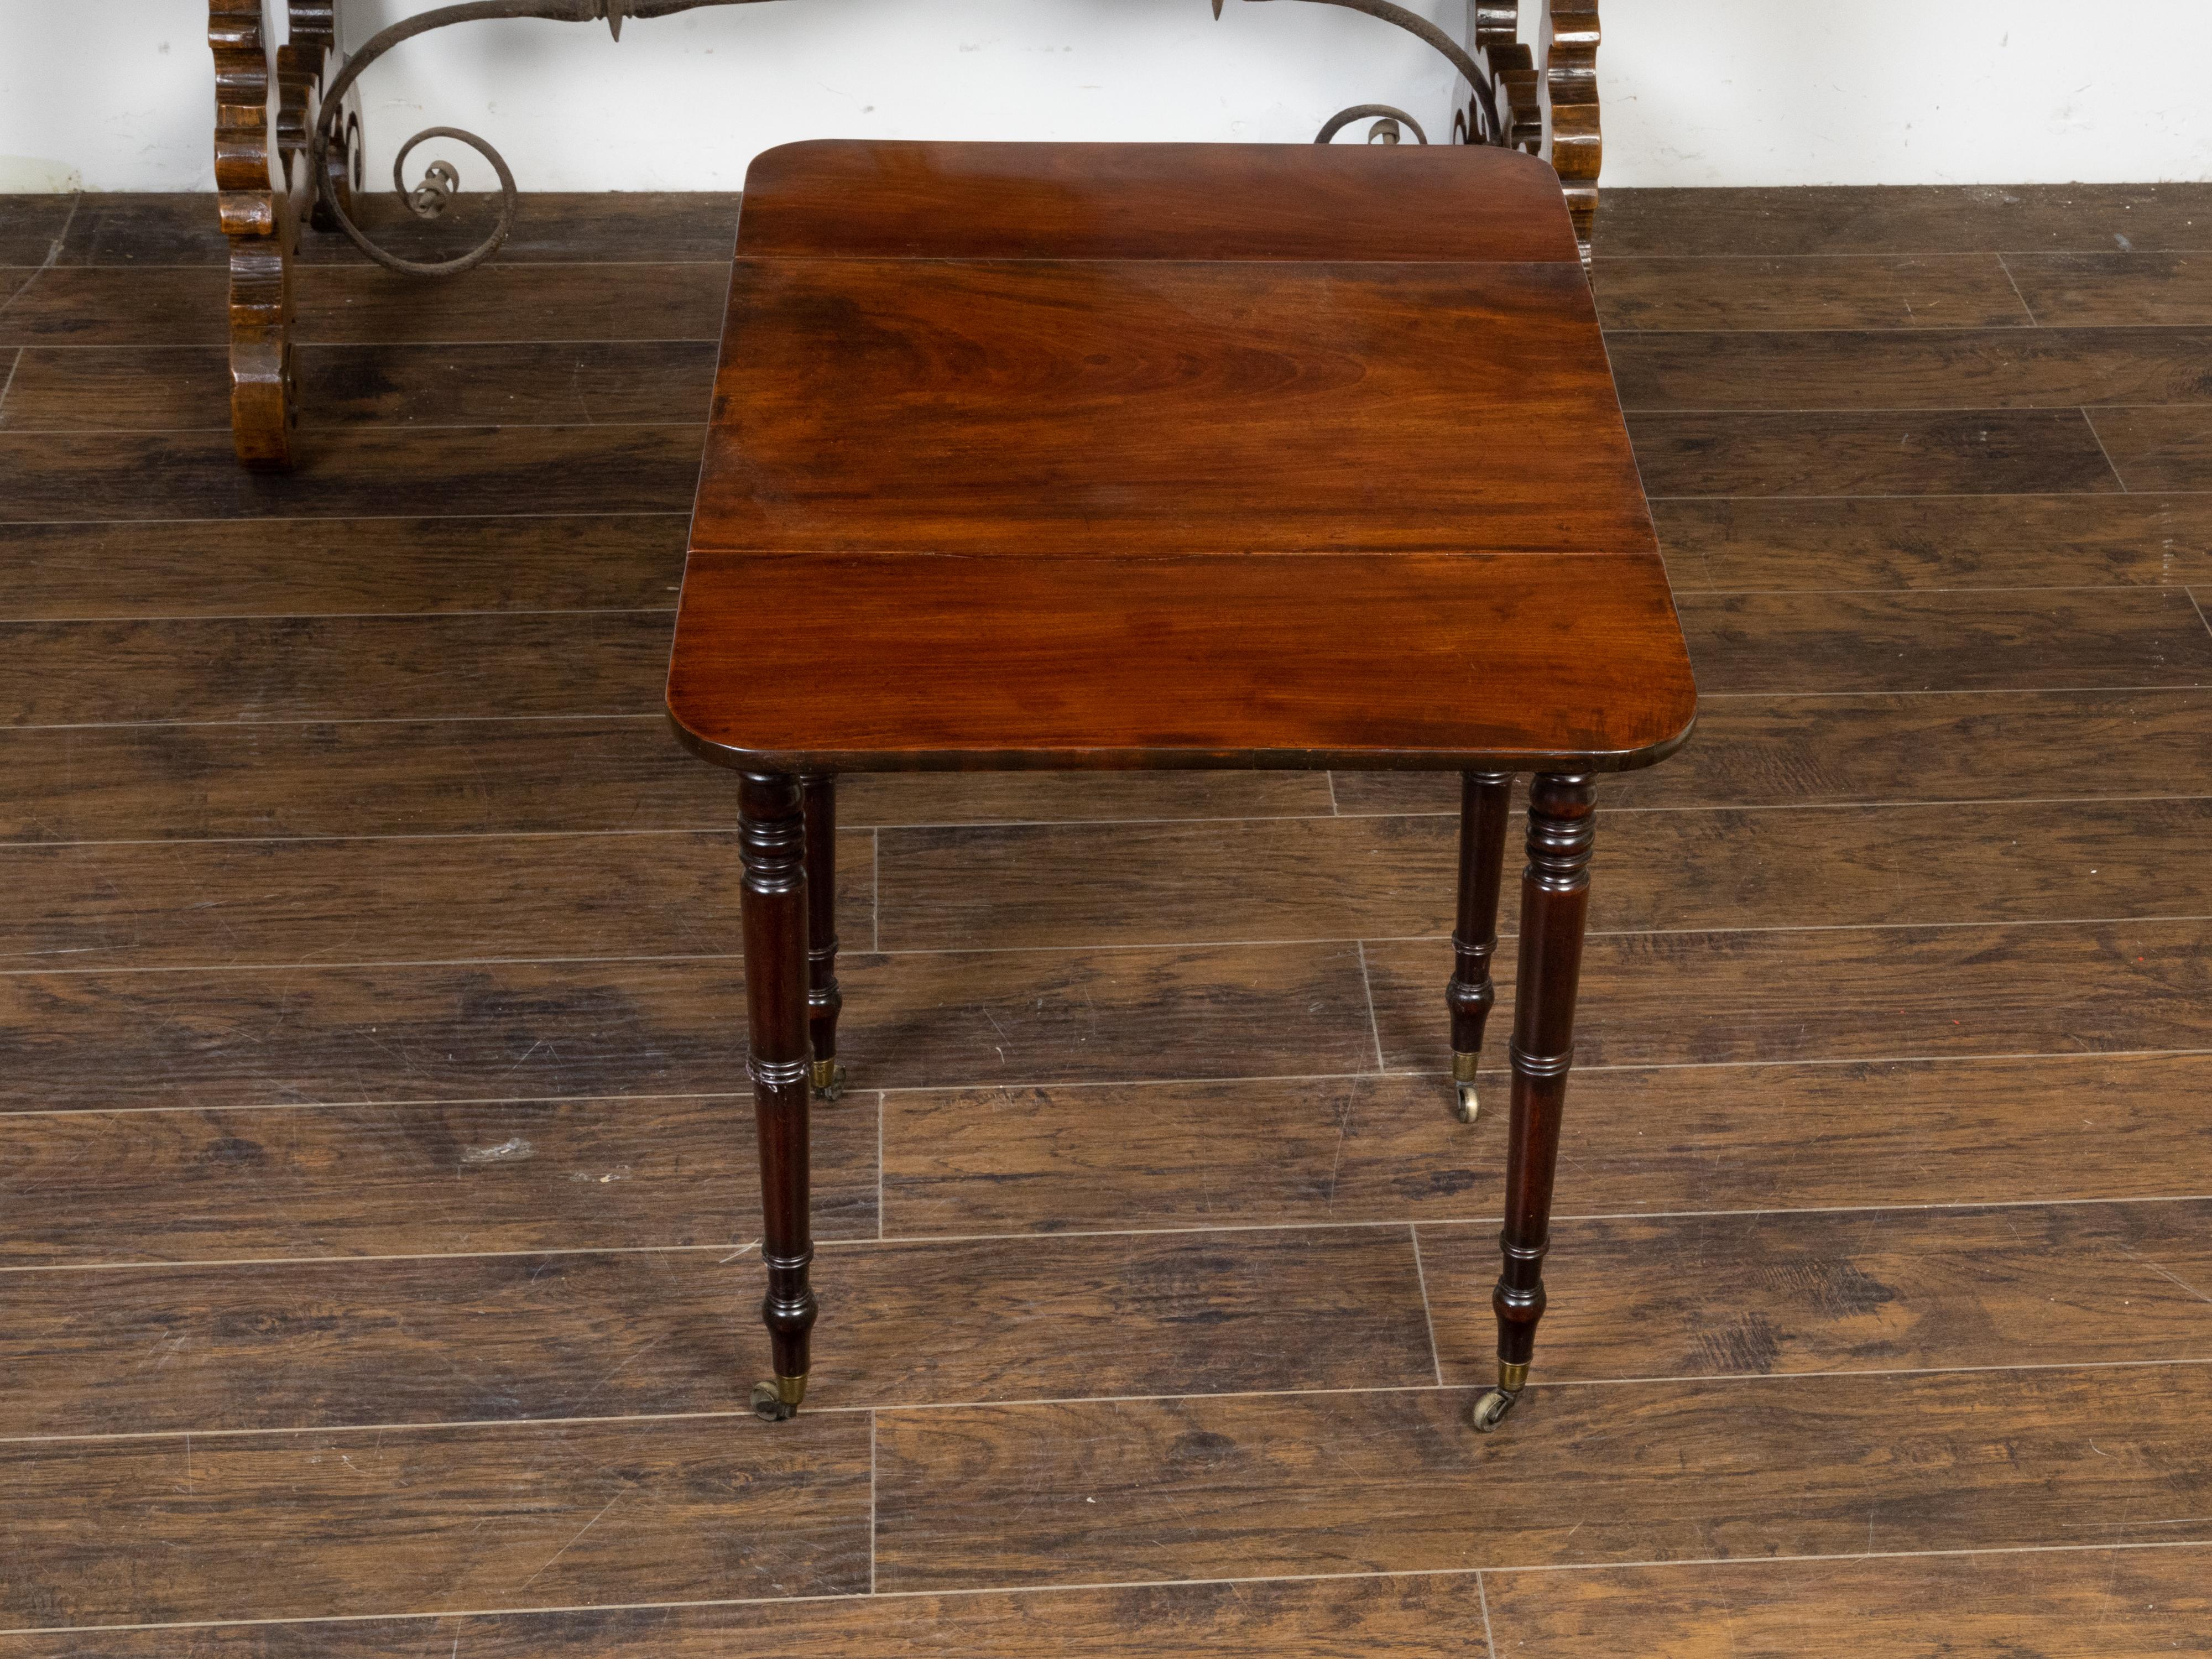 English 1820s Regency Period Mahogany Pembroke Table with Drawer and Turned Legs 1